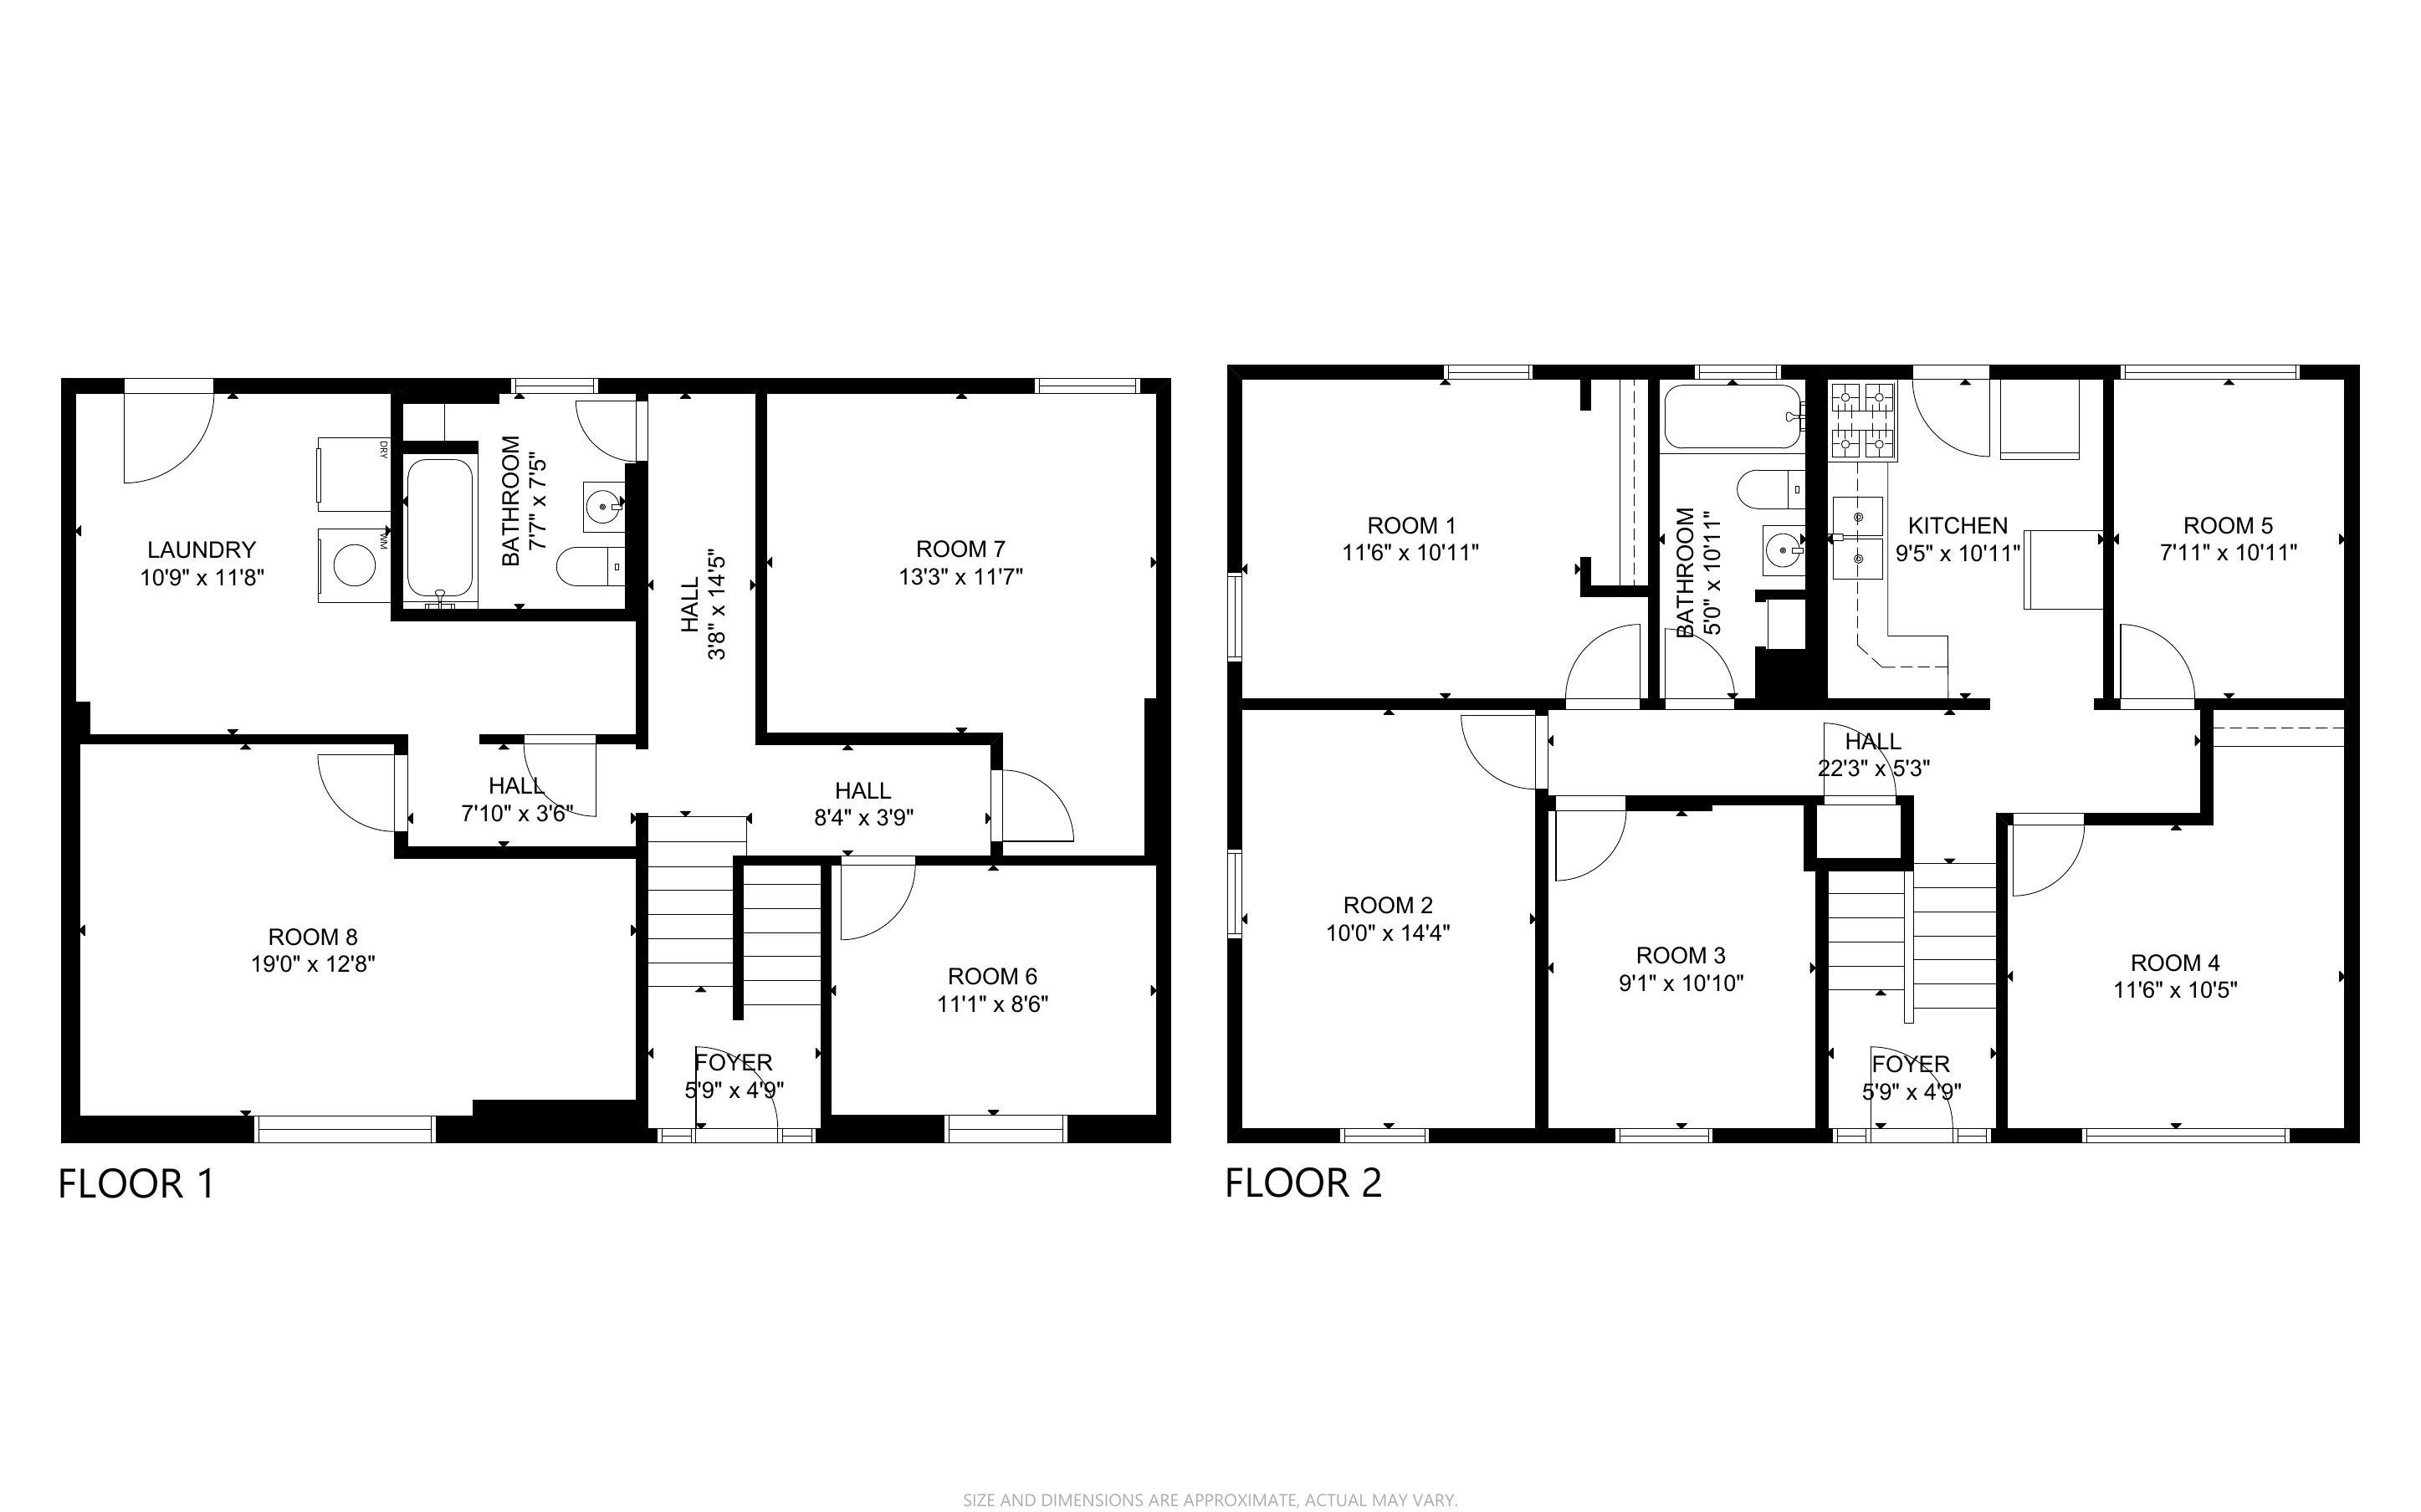 Both floor plans, side-by-side